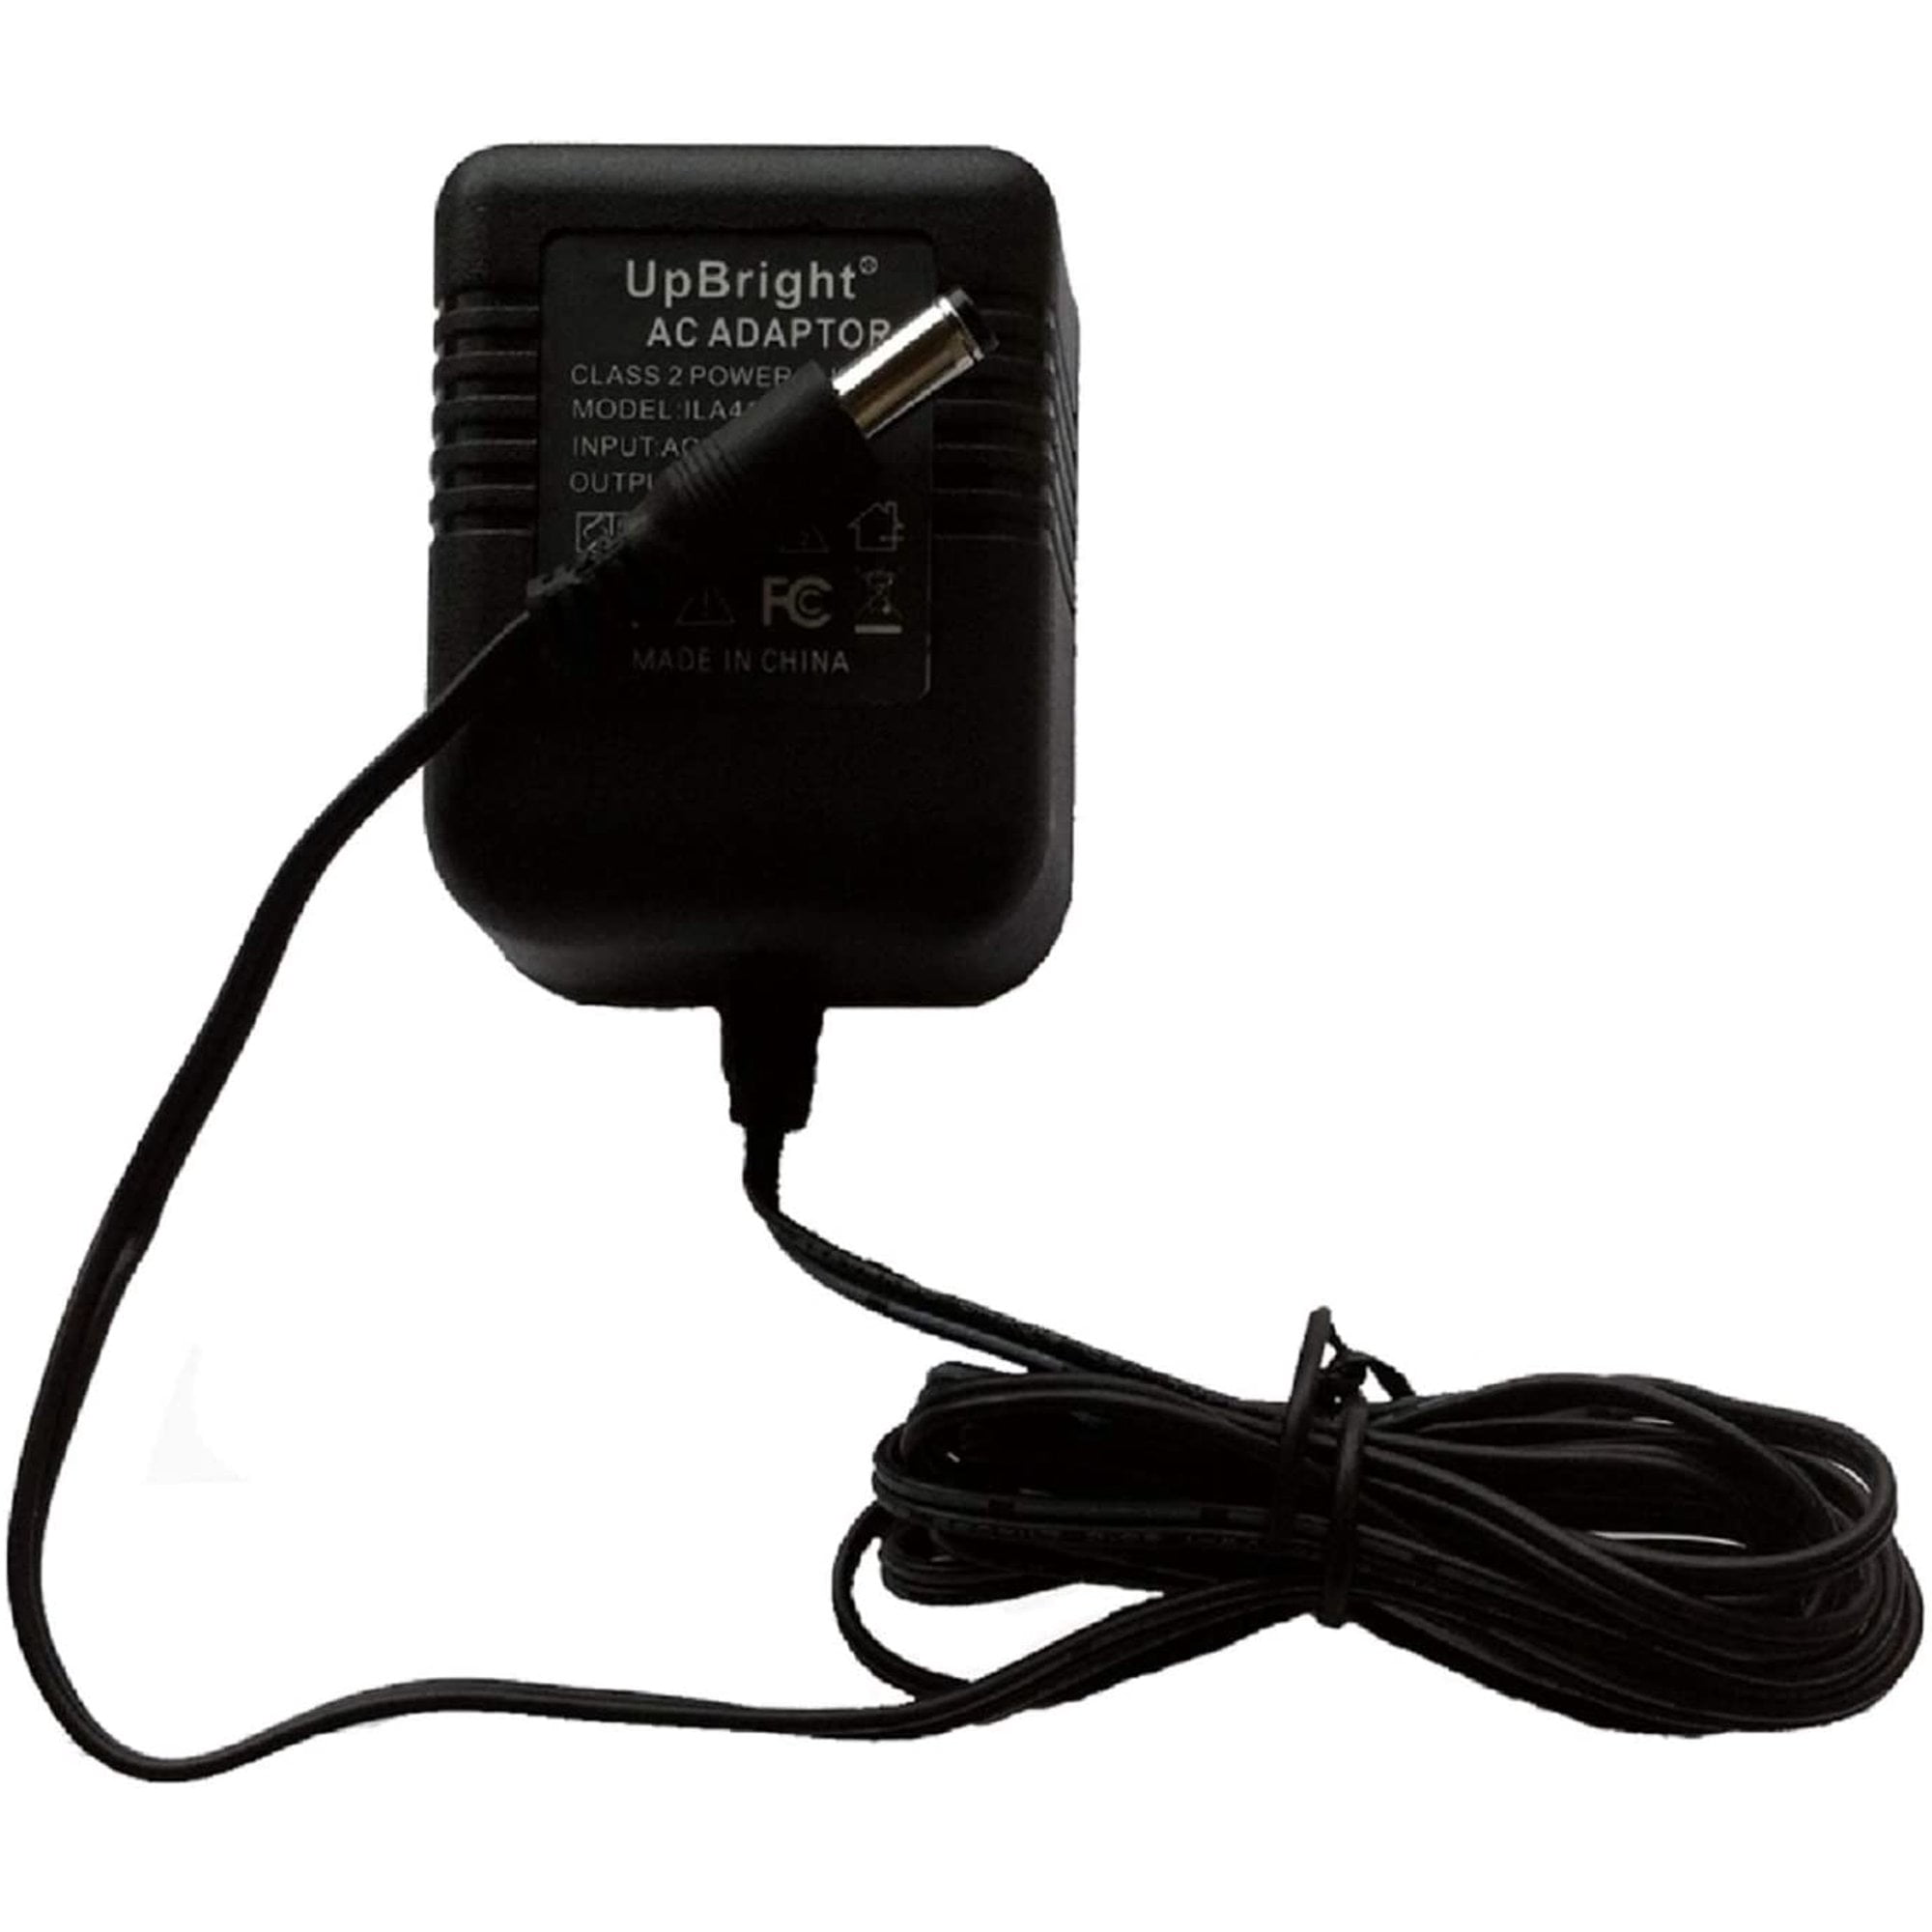 DC 9V Pedal AC Adapter For Ibanez AC109 Regulated Power Supply Wall Charger PSU 